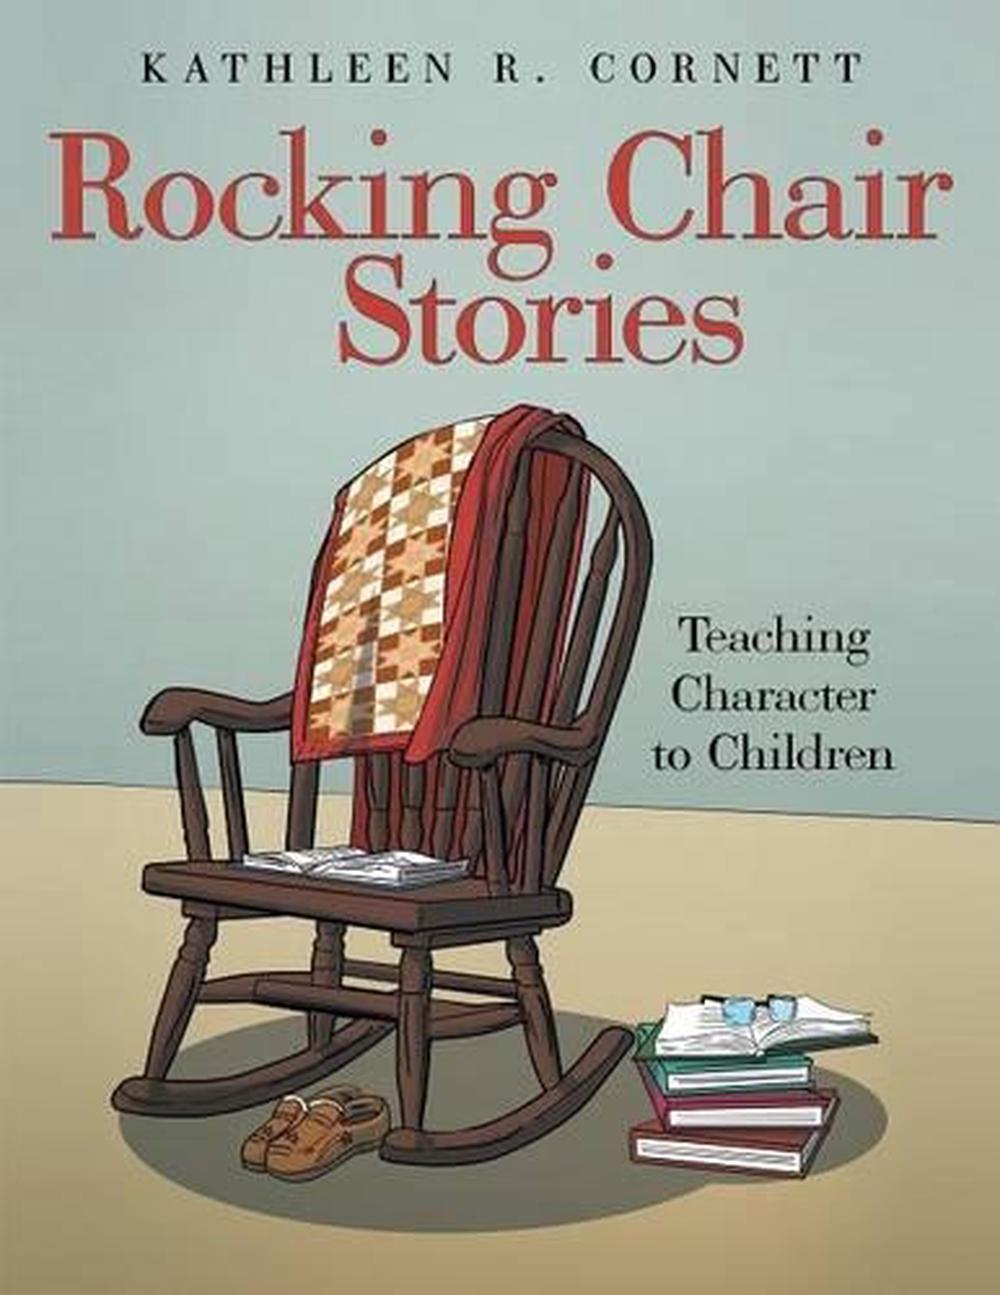 Rocking Chair Stories: Teaching Character to Children by Kathleen R